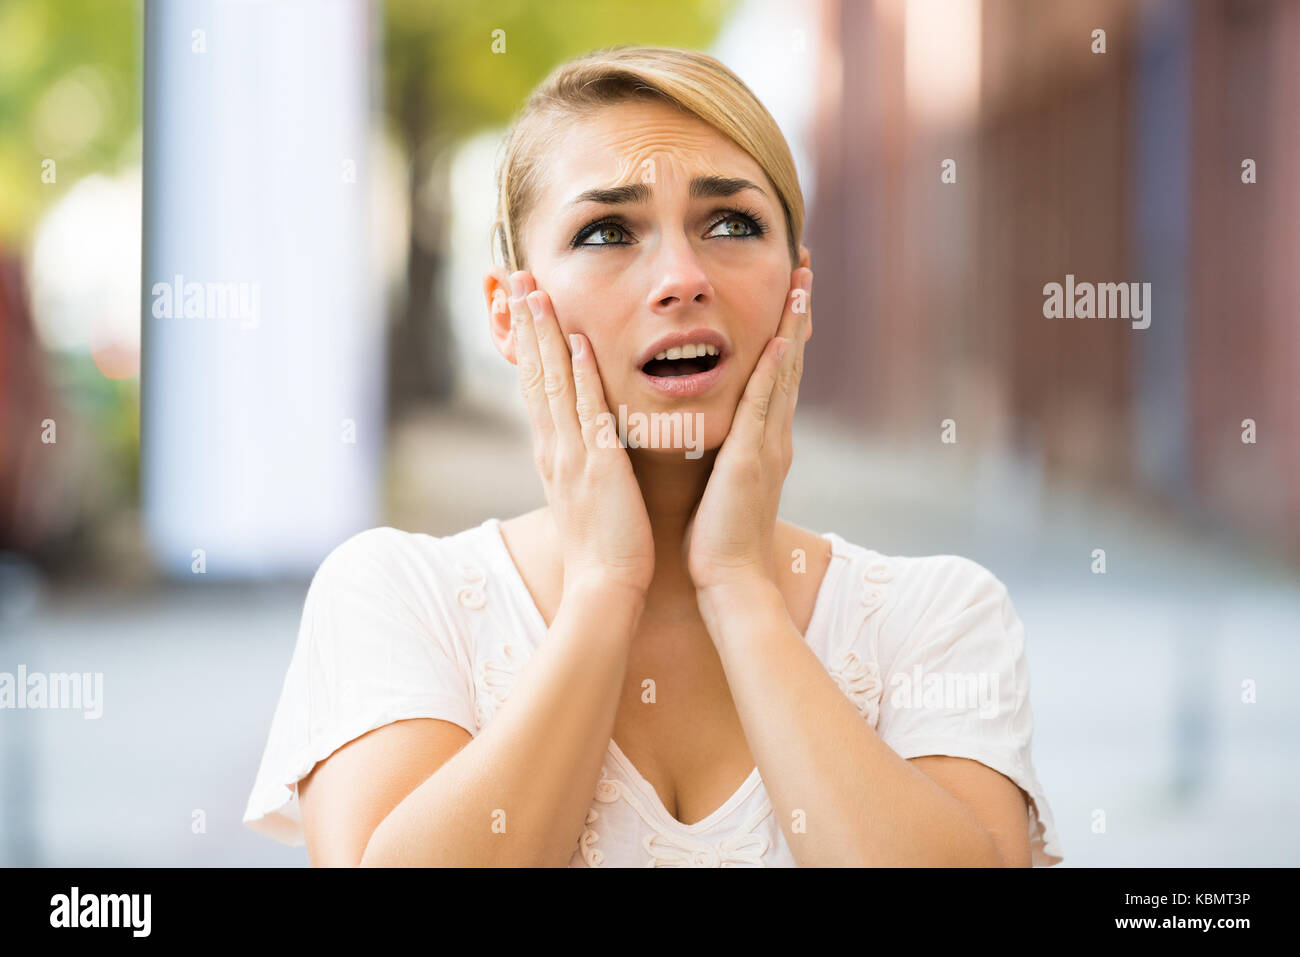 Shocked young woman with hands on face looking up Stock Photo